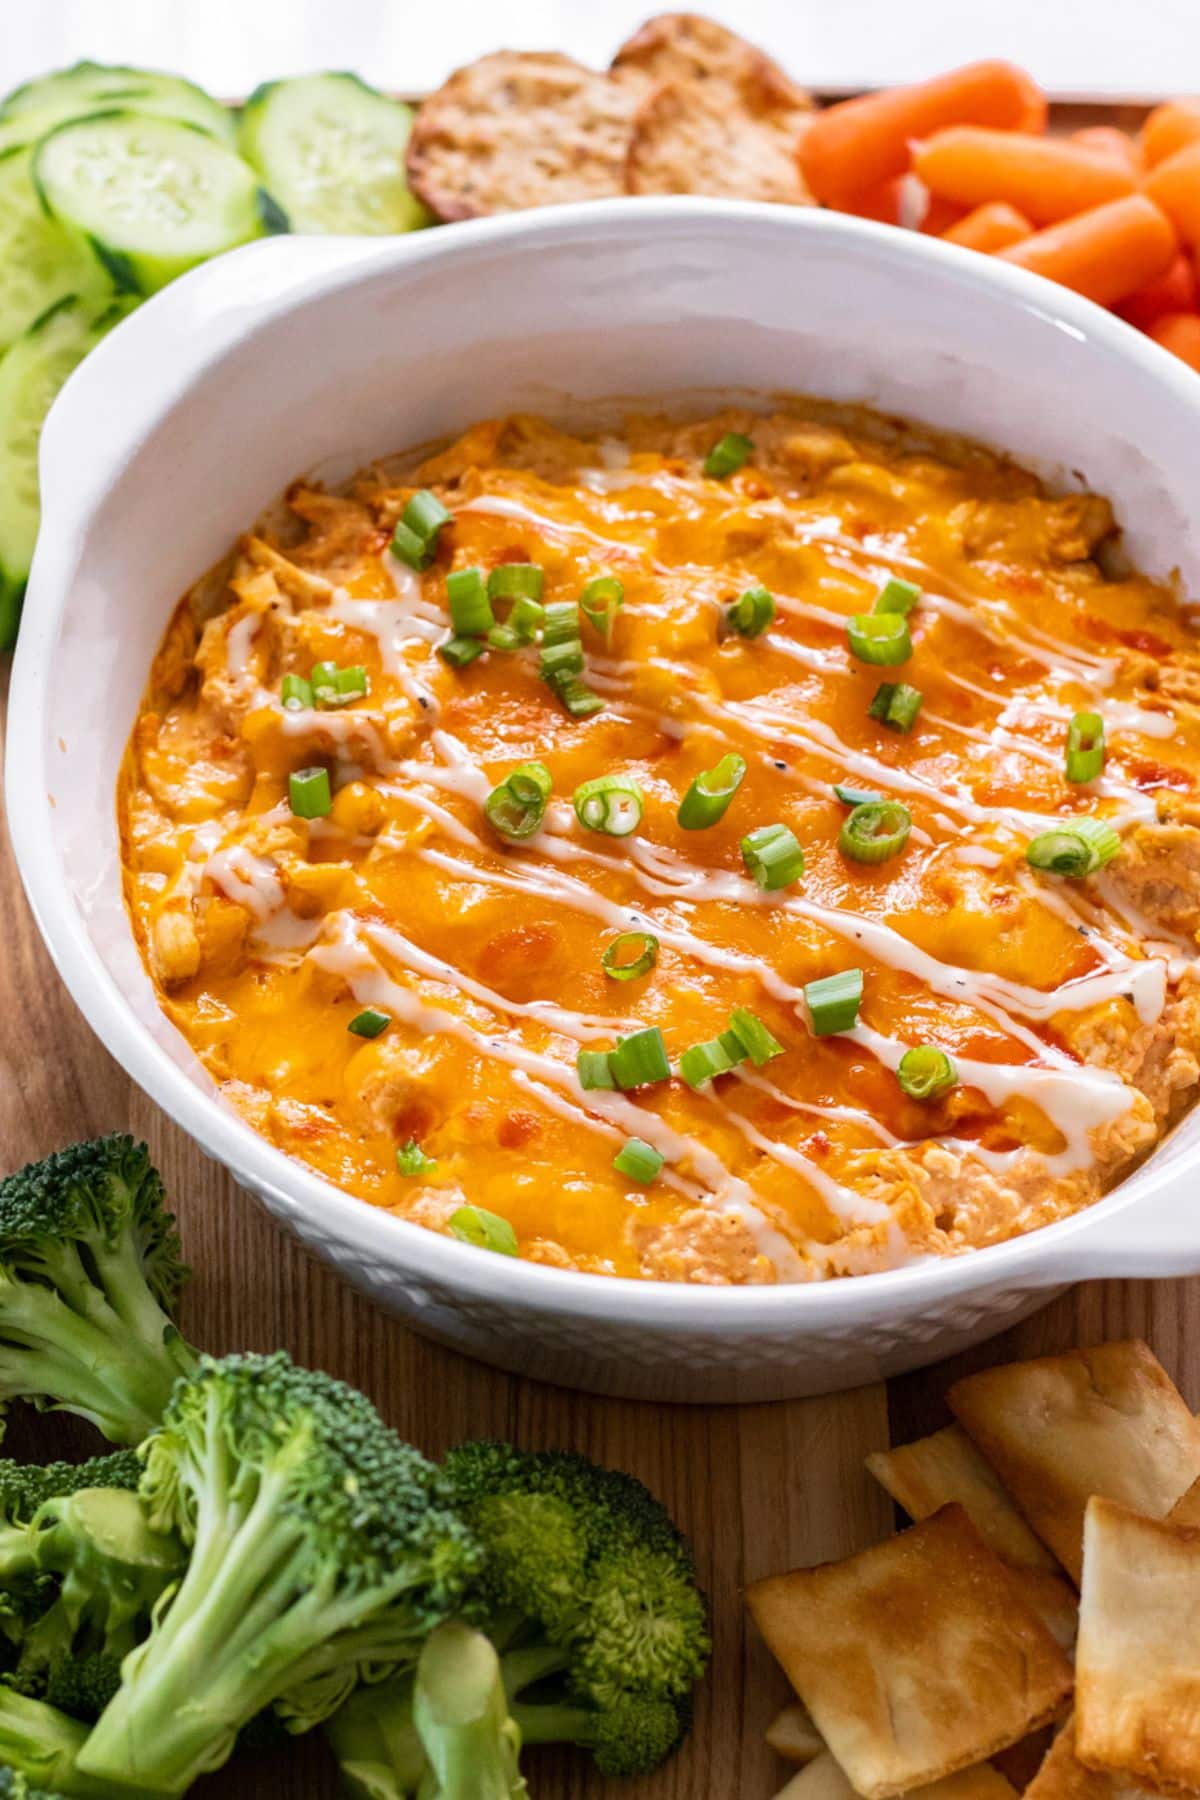 Healthy Buffalo Chicken Dip in a white casserole dish on the table wiht veggies in the background.